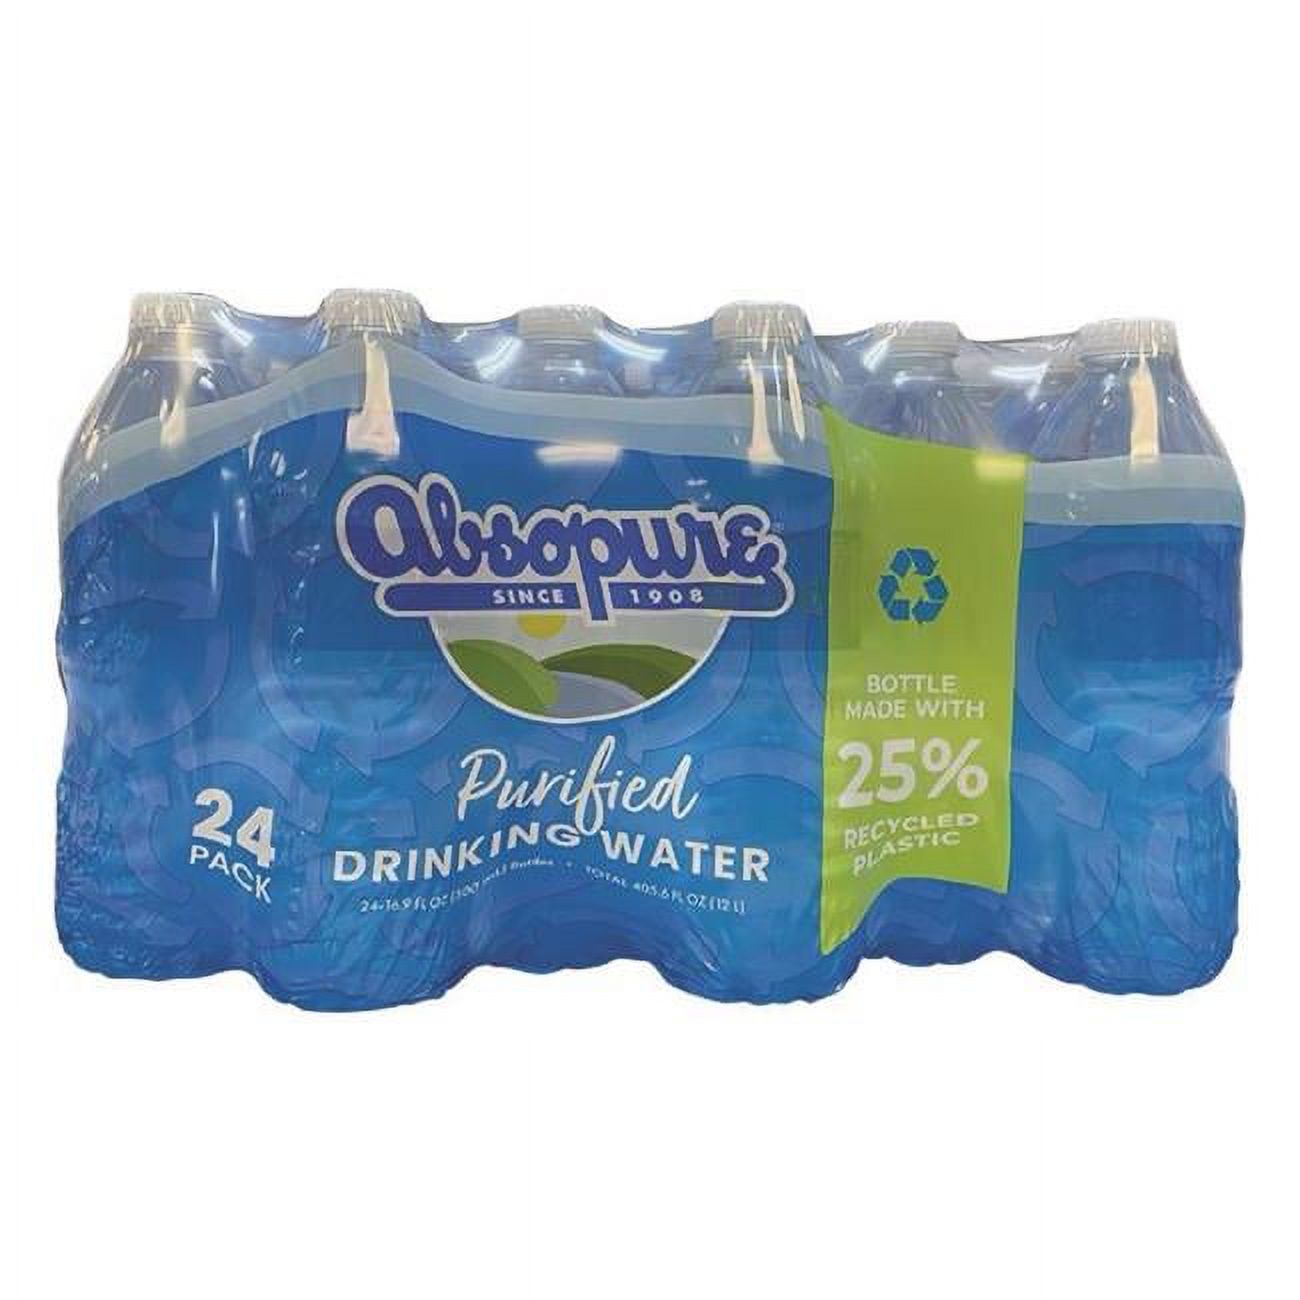 ACE 9602780 16.9 oz Absopure Bottled Water, Pack of 24 - image 1 of 1